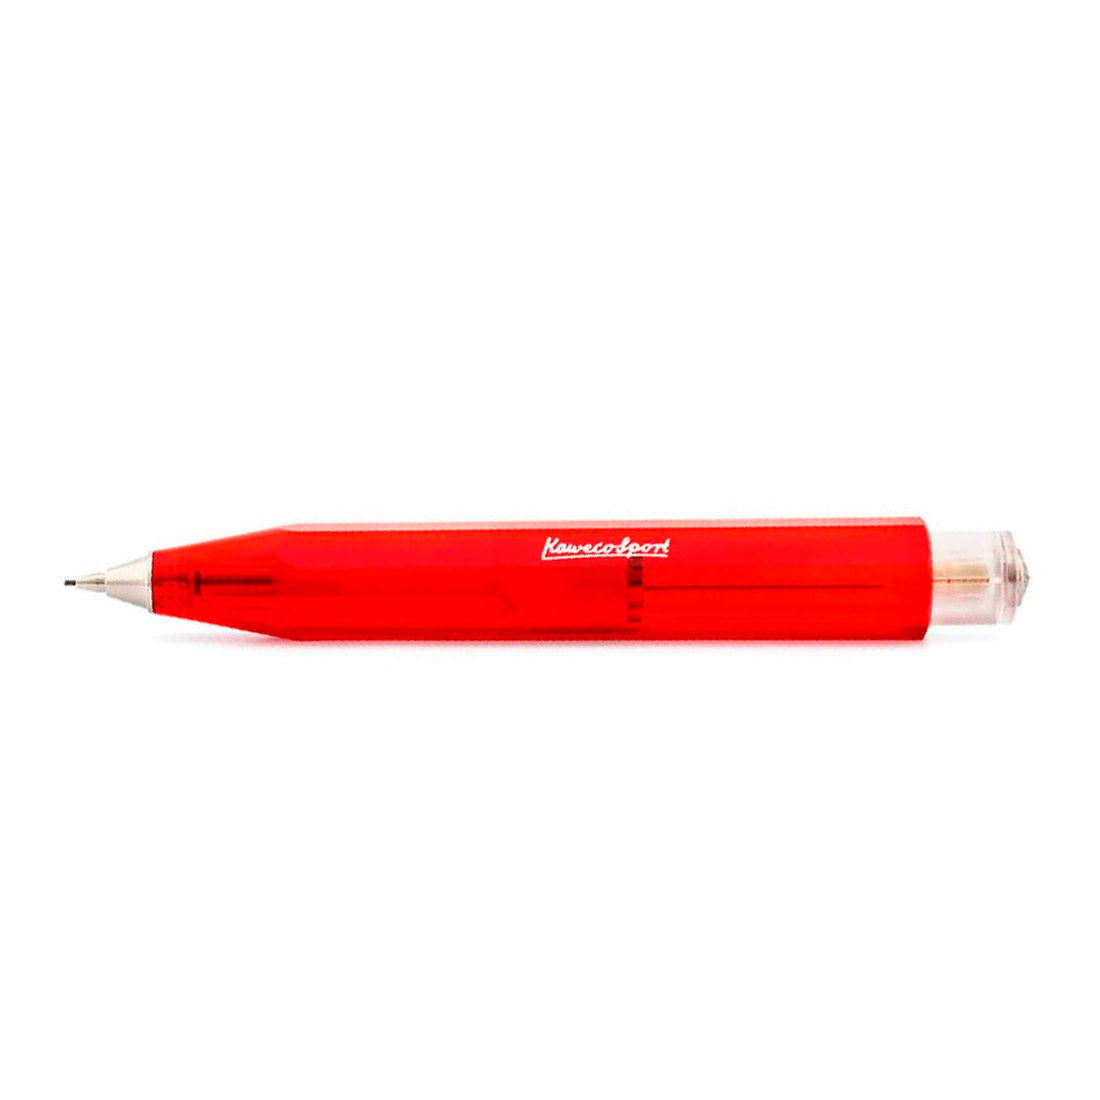 Sport Ice Mechanical Pencil 0.7mm Red - Kaweco 